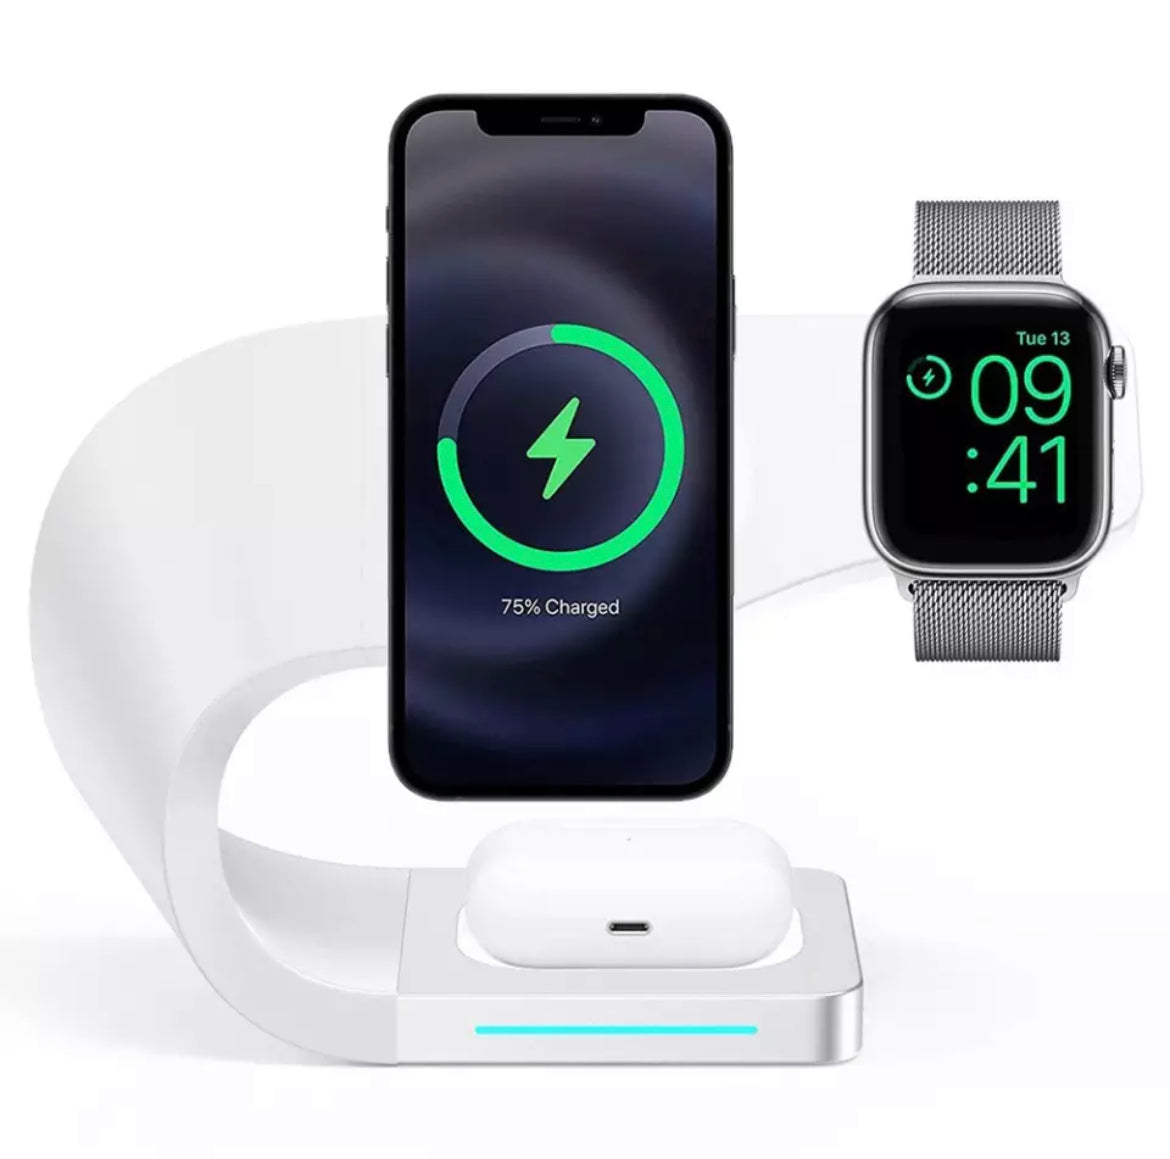 3 in 1 Wireless Chargers Stand For iPhone 13,12 Pro Max Mini Magnetic Charging Dock Station For Airpods Pro Apple watch Charger